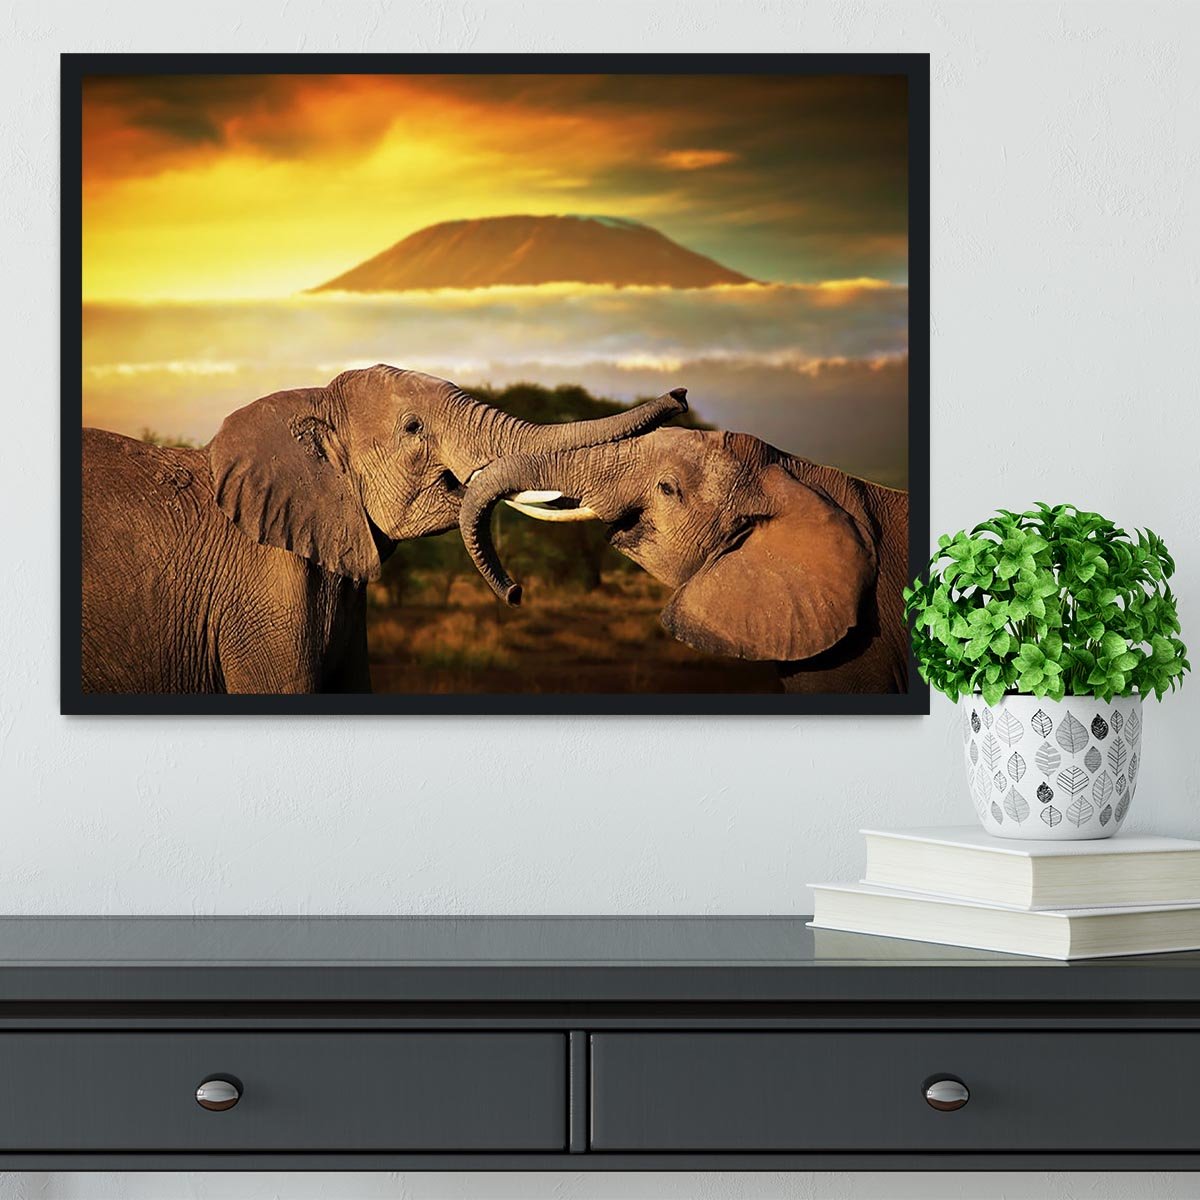 Elephants playing with their trunks Framed Print - Canvas Art Rocks - 2